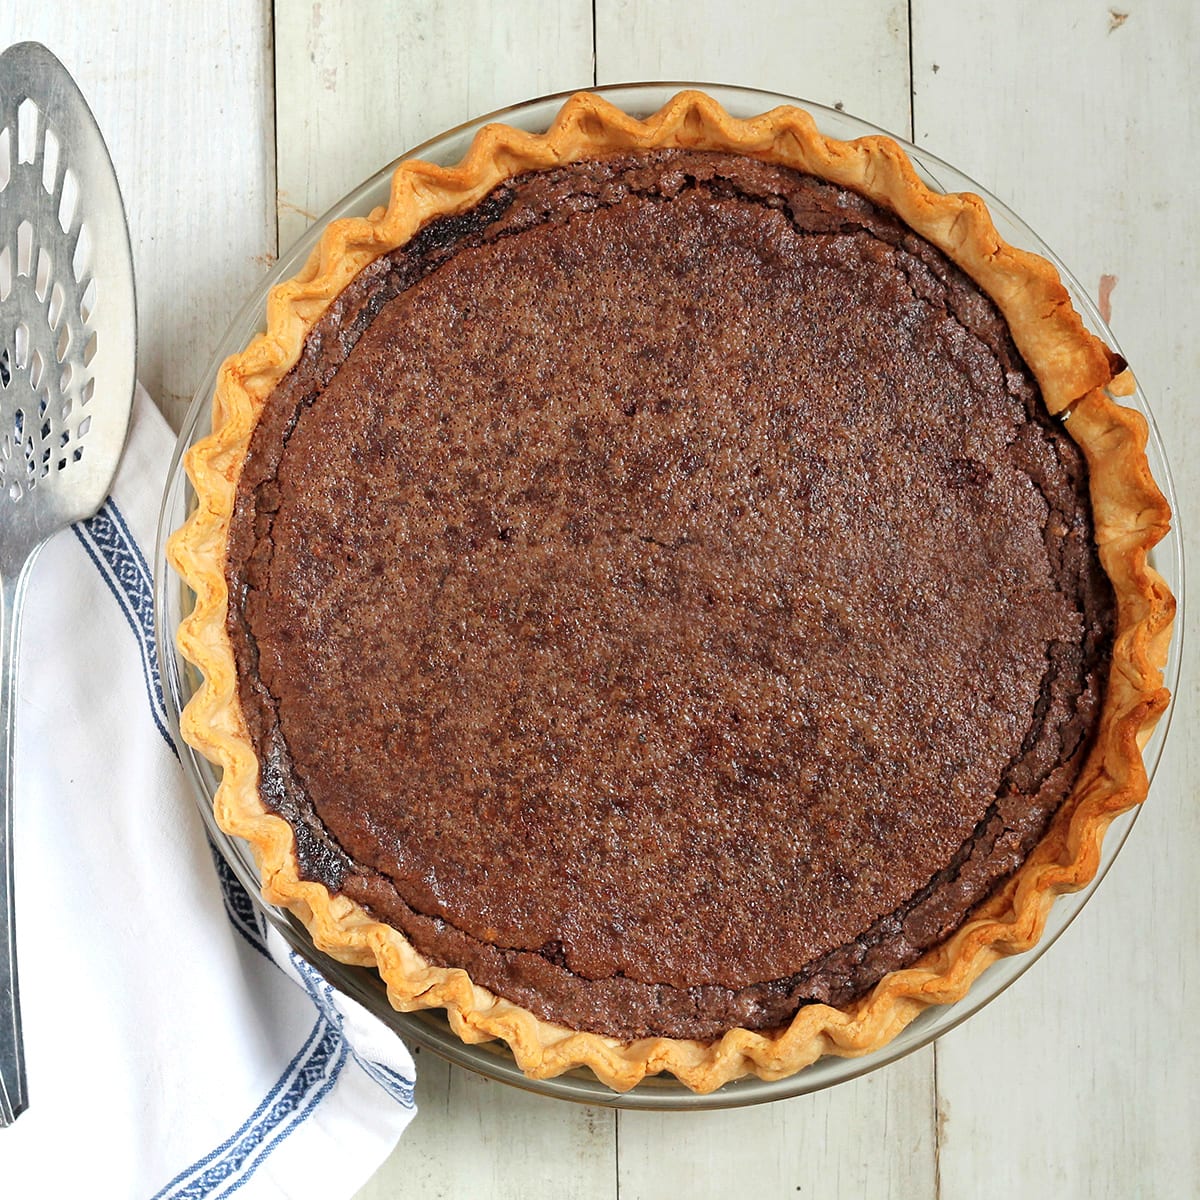 Image of chocolate chess pie by Lisa Donovan